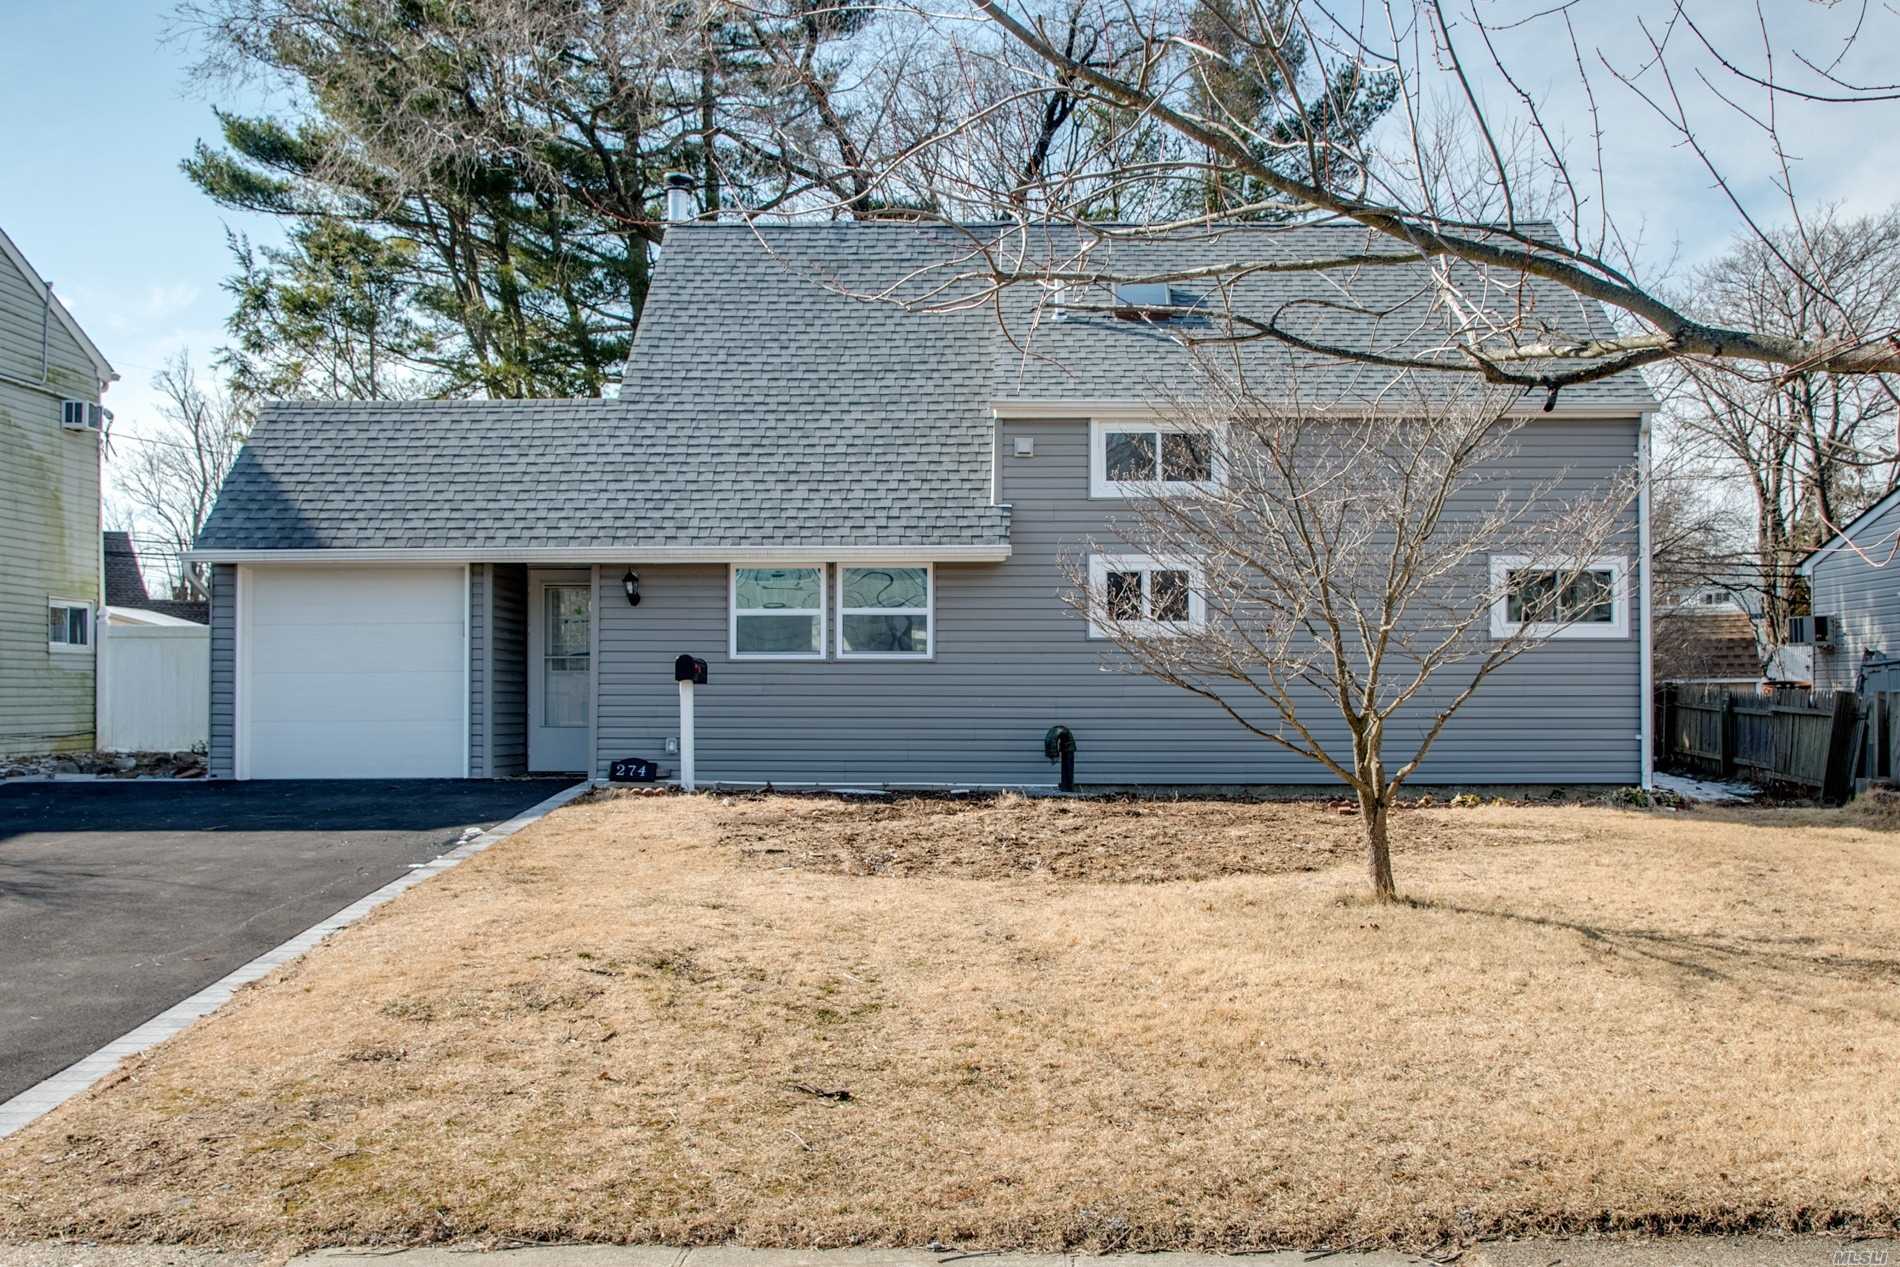 Don&rsquo;t Miss This 4 Bedroom 2 Bath Ranch On Over Sized Park Like Property. House Features New Eat In Kitchen, Two New Bathrooms, New Siding And Windows. New Burner...Too Much To List!